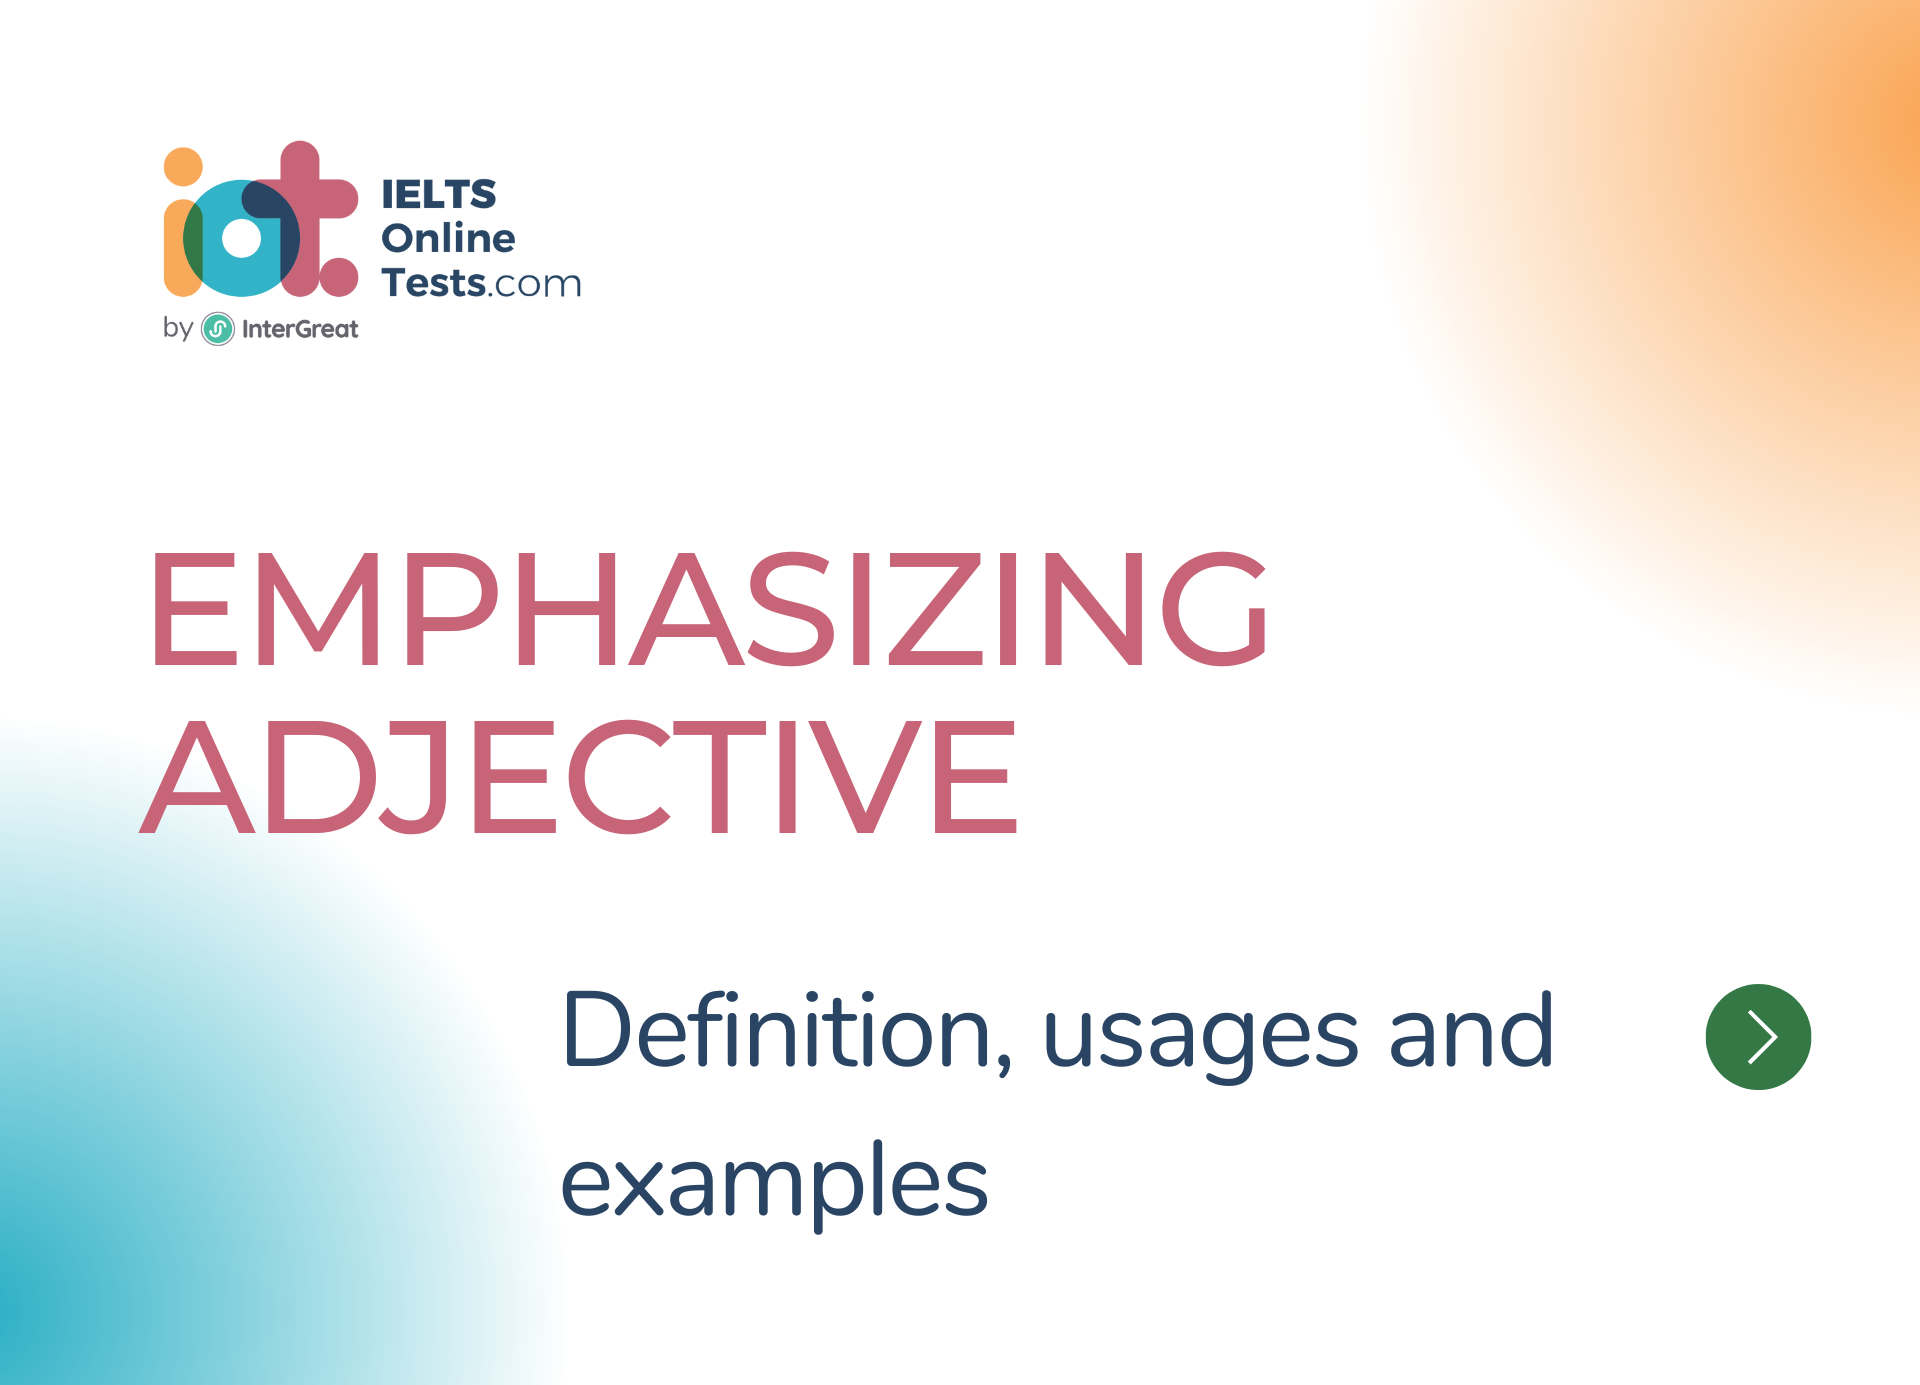 Emphasizing Adjective definition, usages and examples